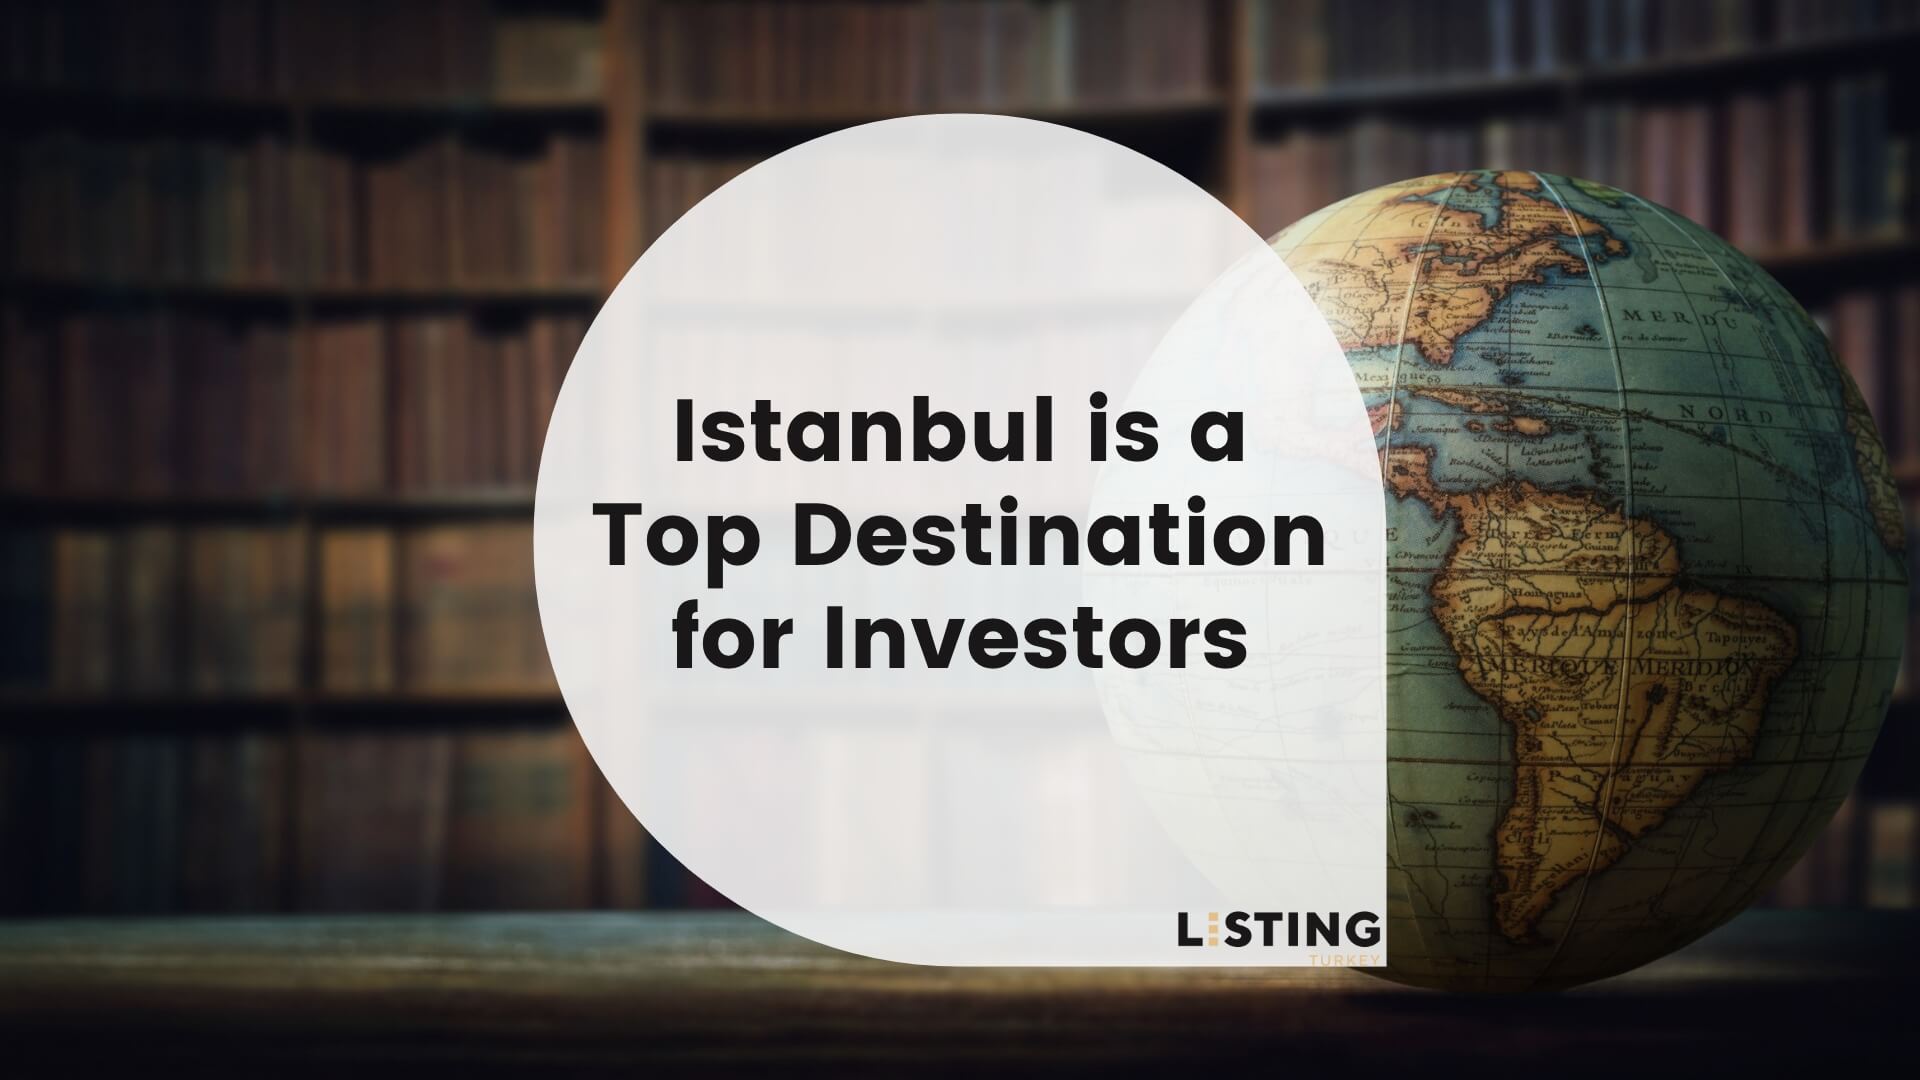 Istanbul is a Top Destination for Investors